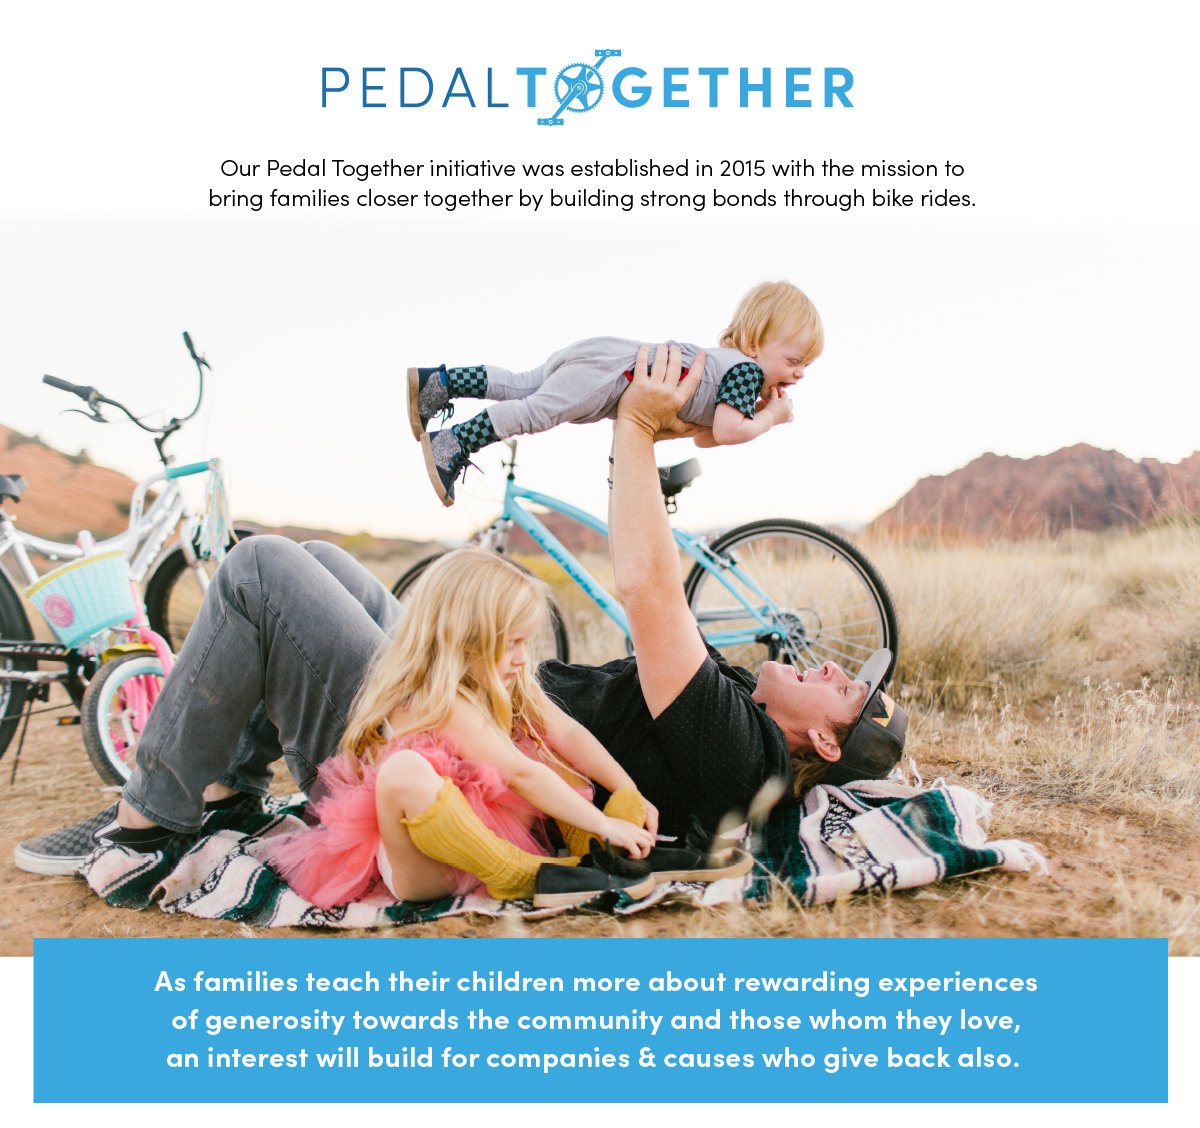 Our pedal together intiative was established in 2015 with the mission to bring families closer together by building strong bonds through bike rides. | As families teach their children more about rewarding experiences of generosity towards the community and those whom they love, an interest will build for companies and causes who give back, also.